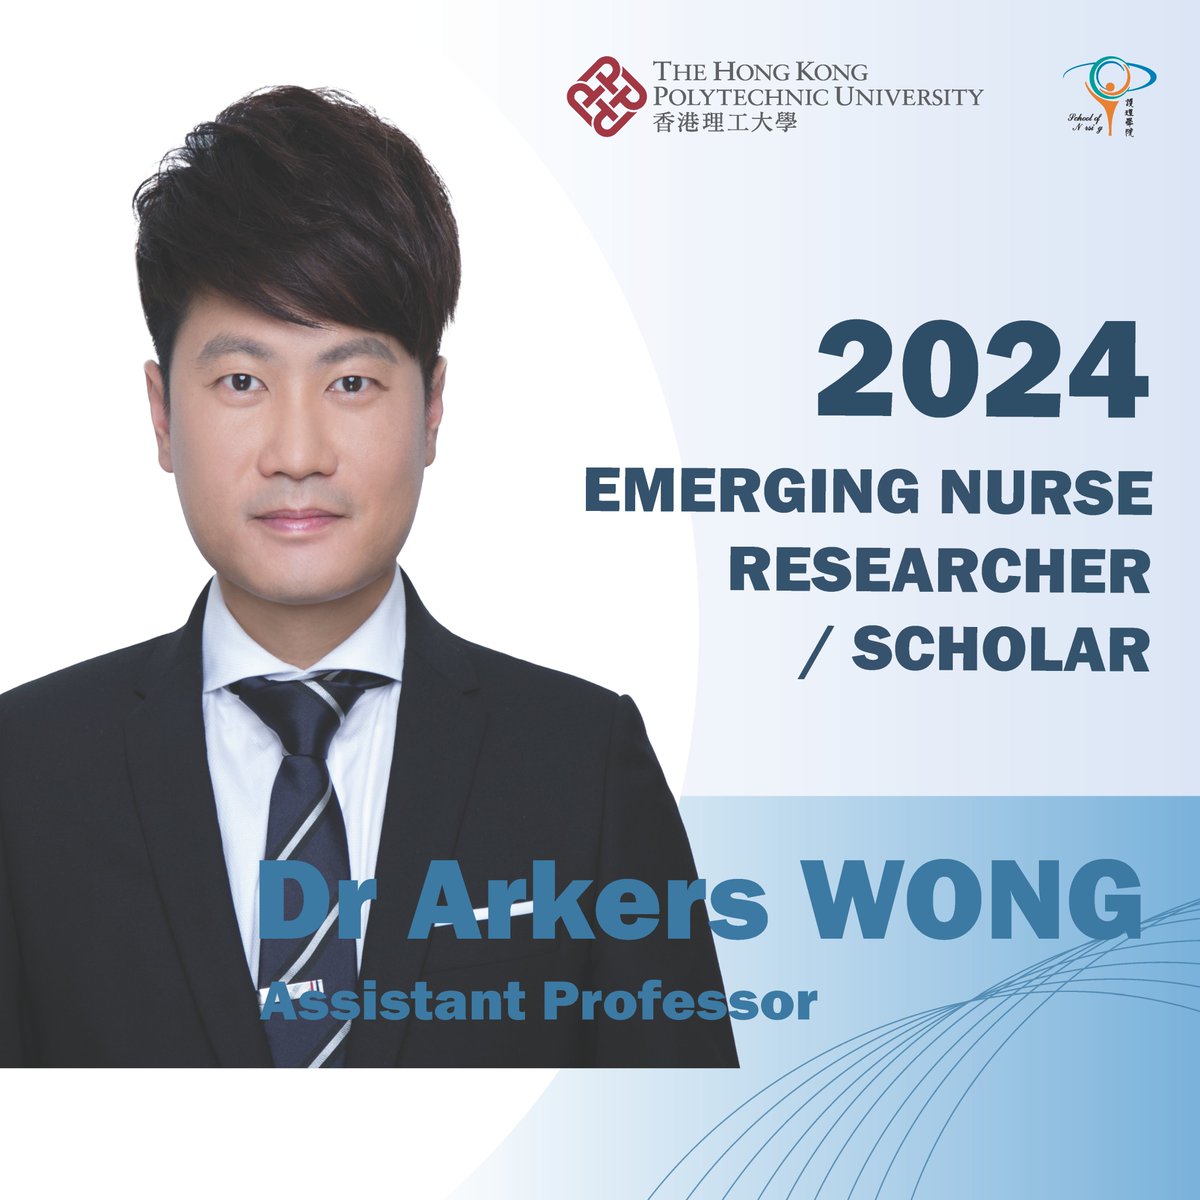 Congratulations to #PolyUNursing Dr Justina Liu for being inducted into the 2024 International Nurse Researcher Hall of Fame and Dr Arkers Wong for being received the 2024 Emerging Nurse Researcher/Scholar from the Sigma Theta Tau International Honor Society of Nursing (Sigma).